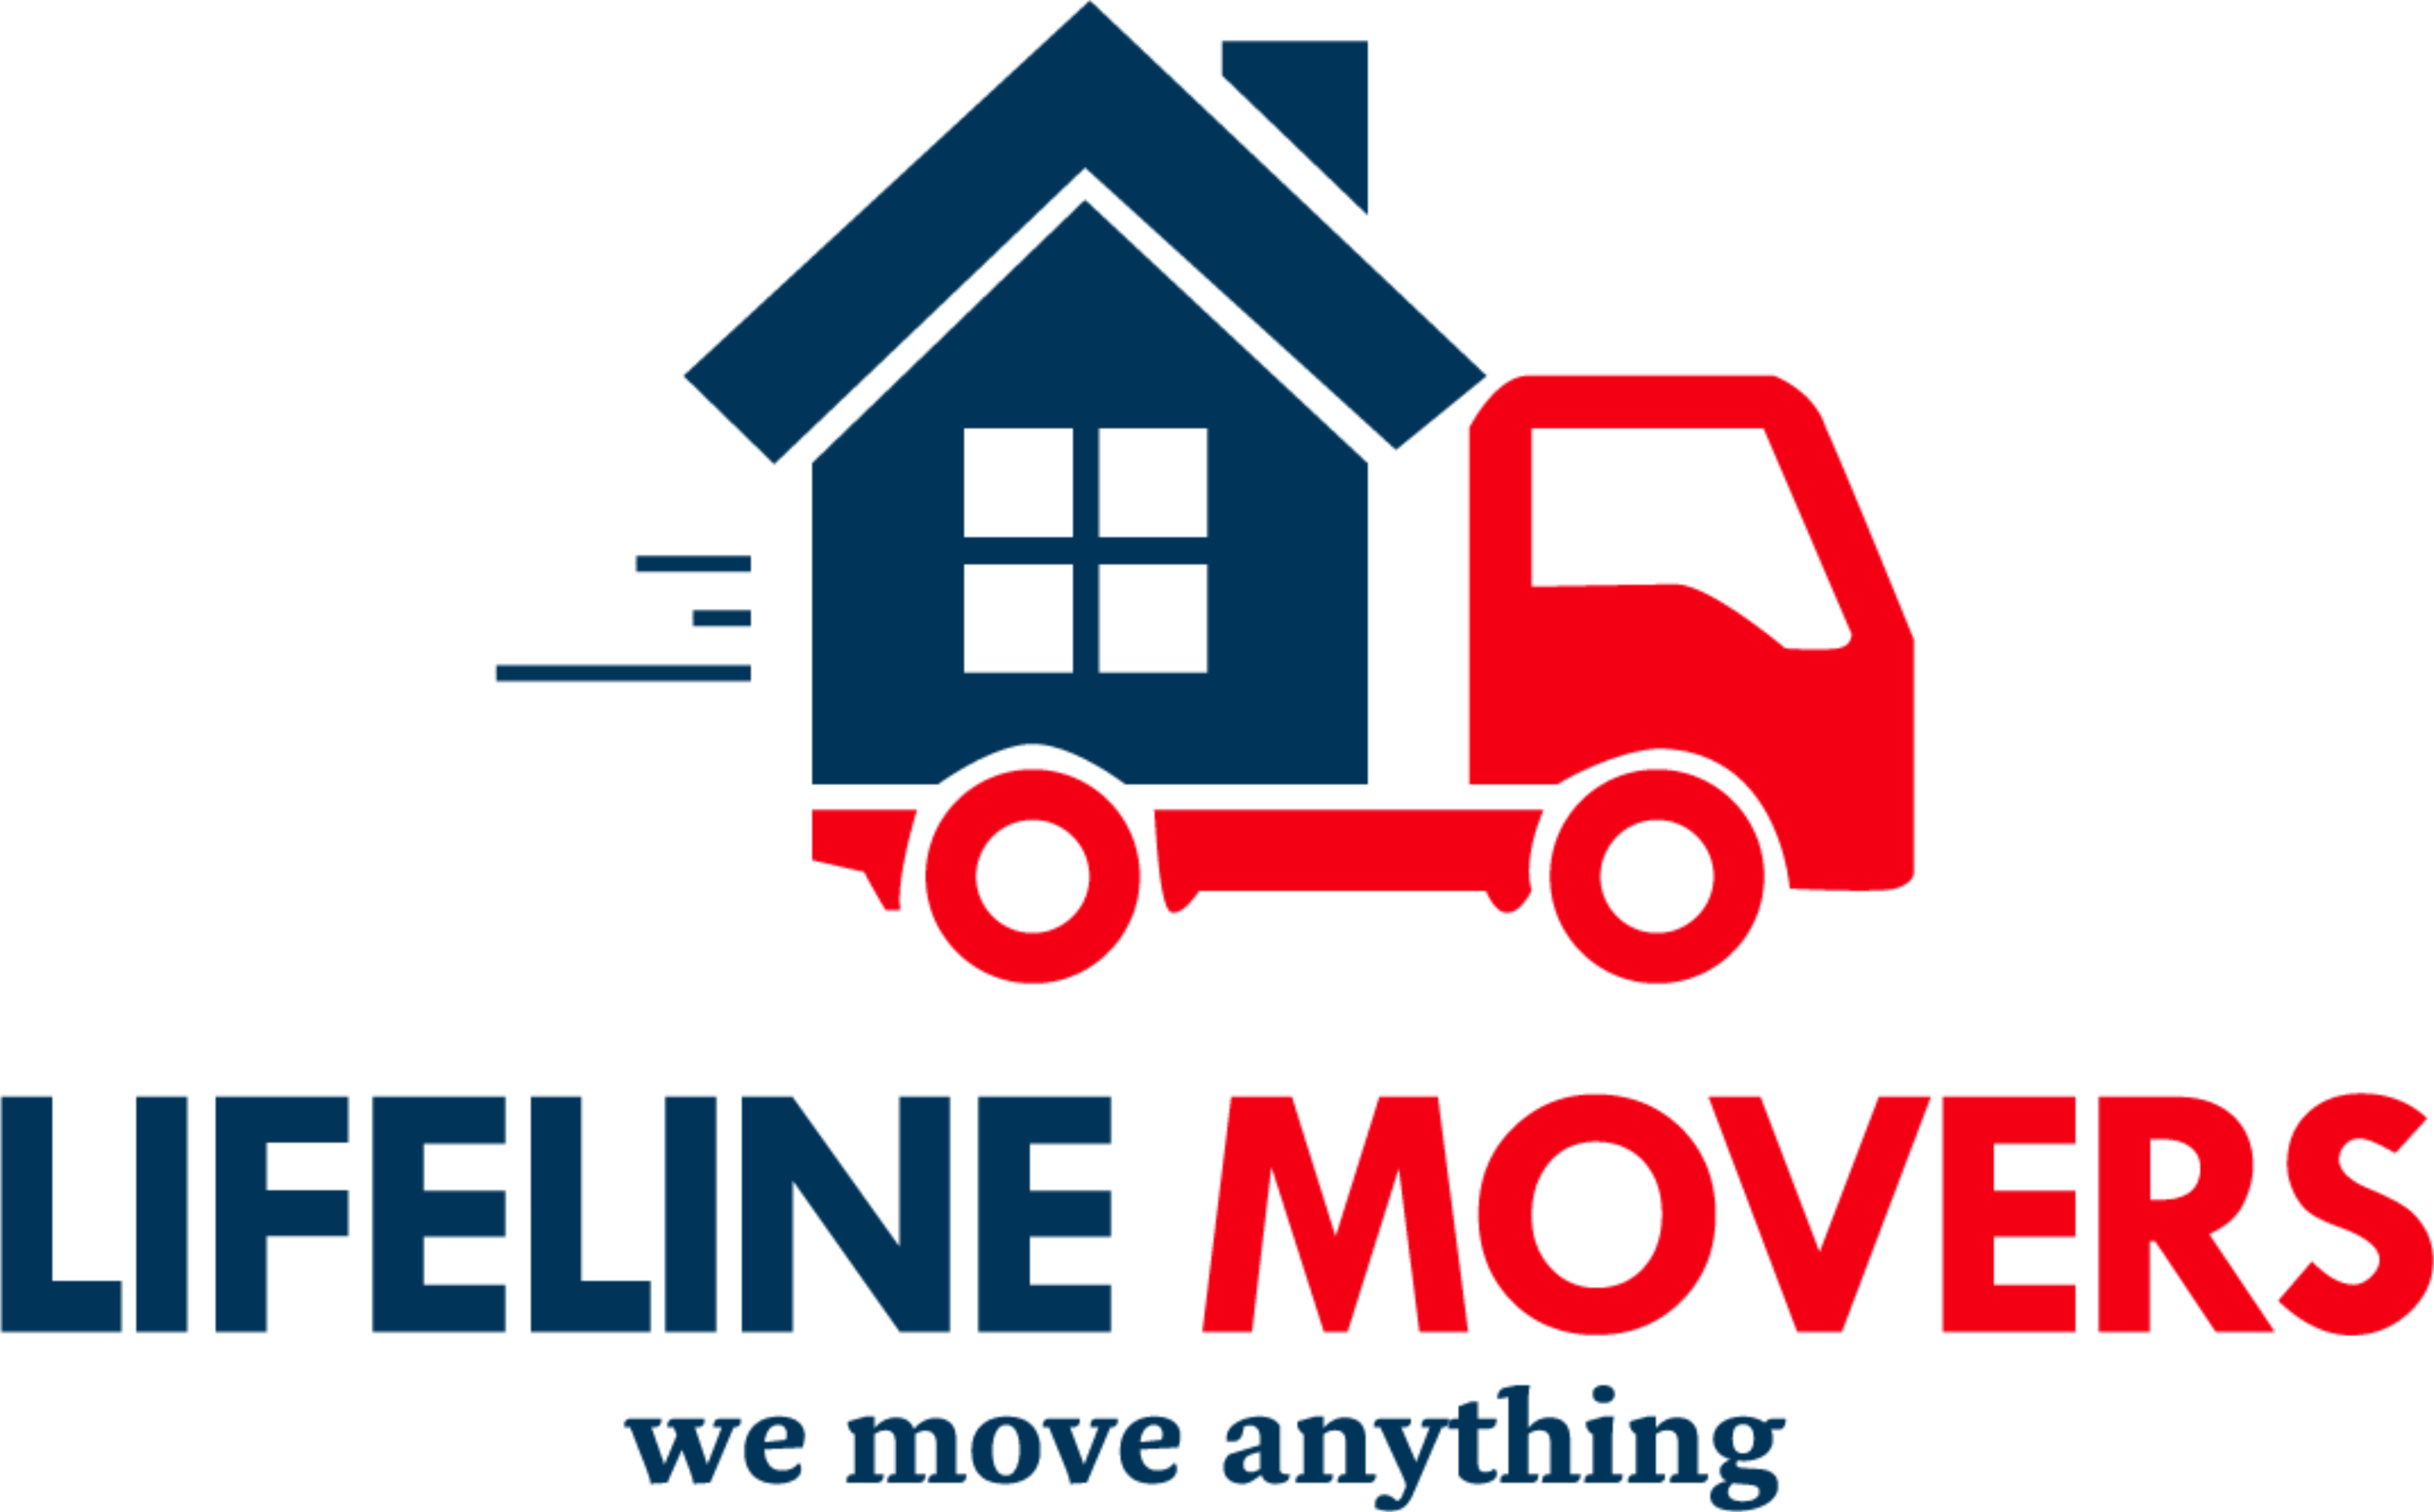 Lifeline Movers-Qualified professional removalists in Tasmania